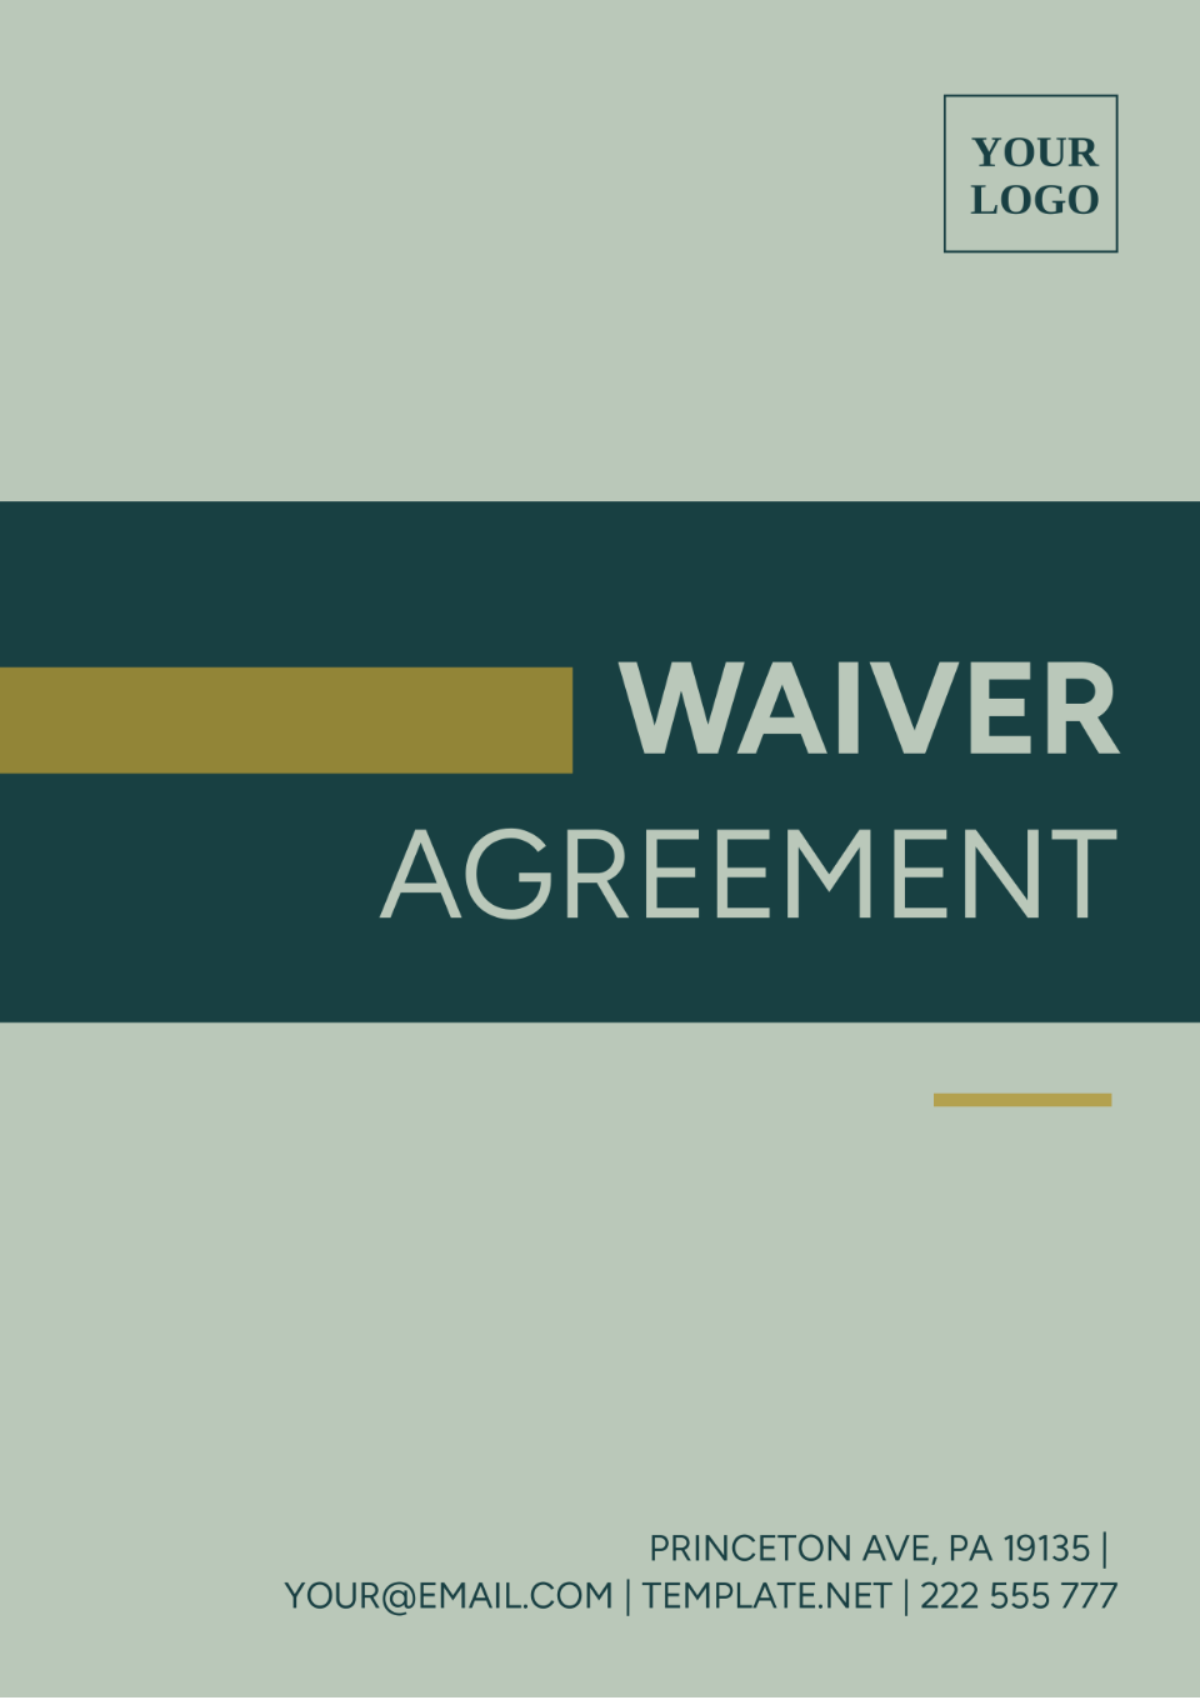 Waiver Agreement Template